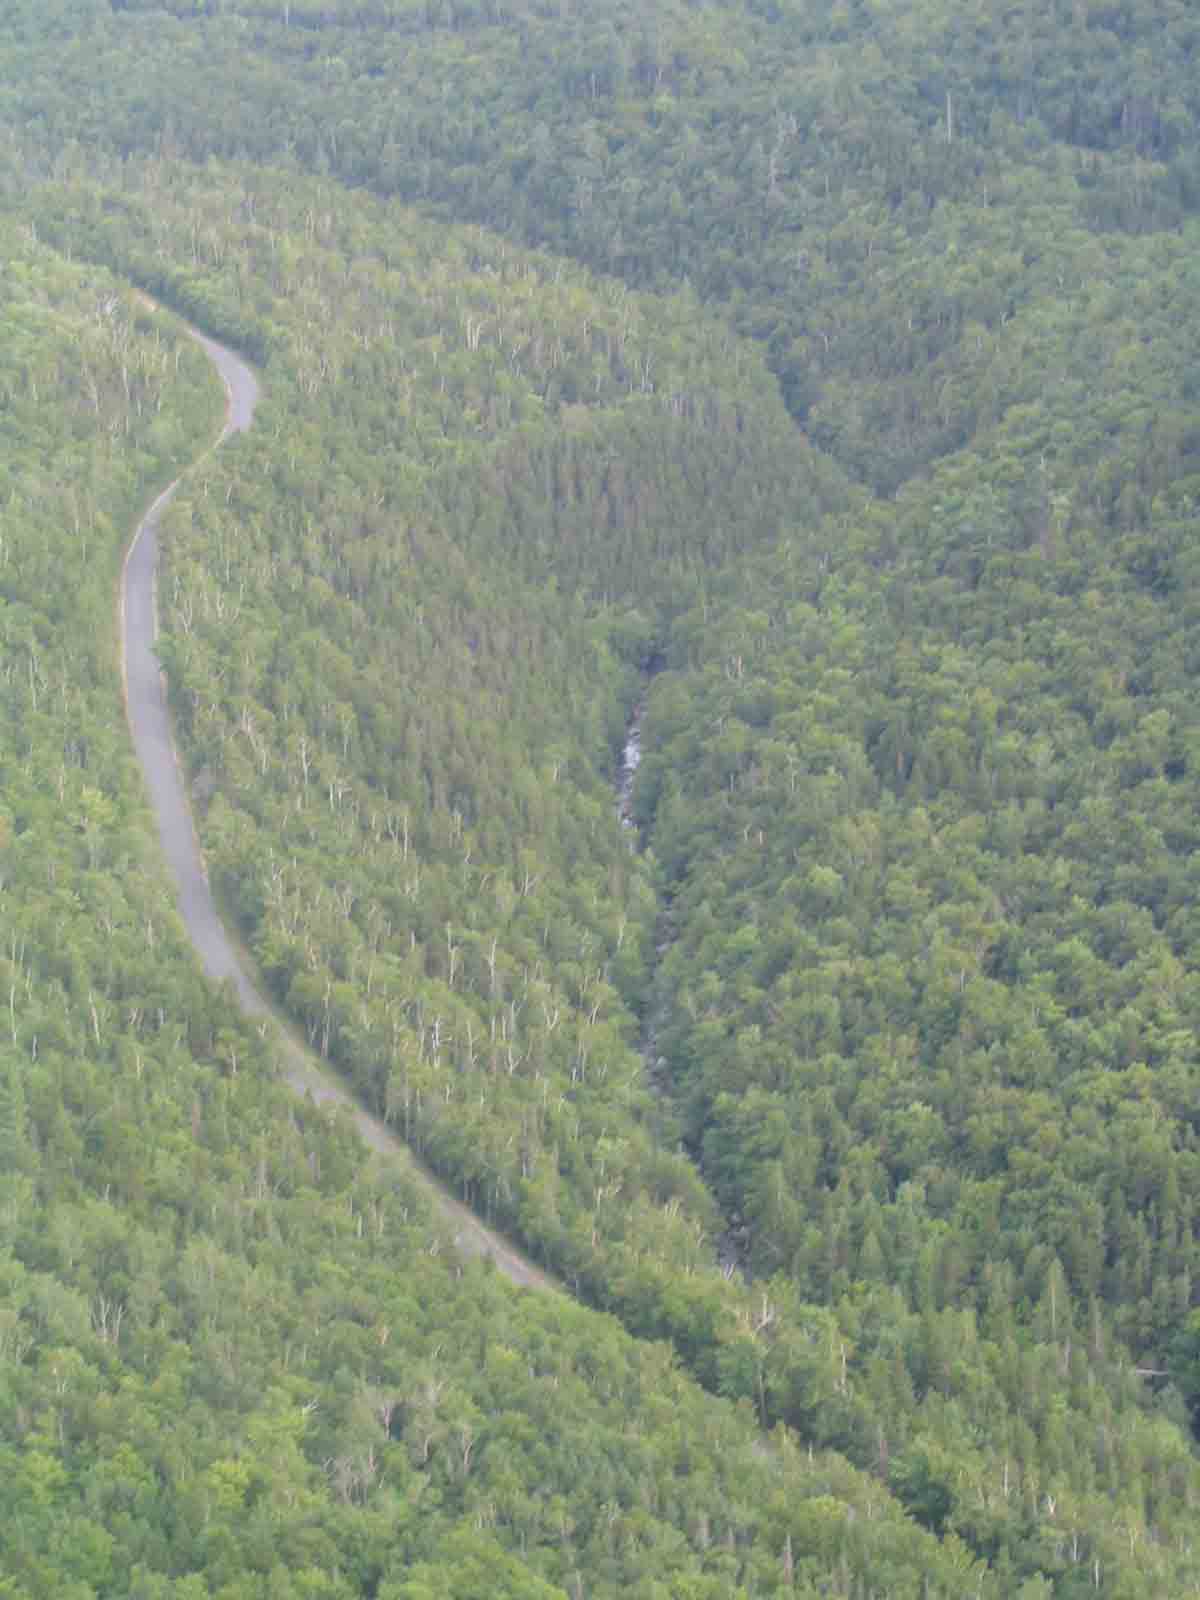 12.7 MM. Here is the view from the overlook 900 feet above Black Brook Notch. Directly below is South Arm Road and paralleling it is Black Brook. Courtesy askus3@optonline.net